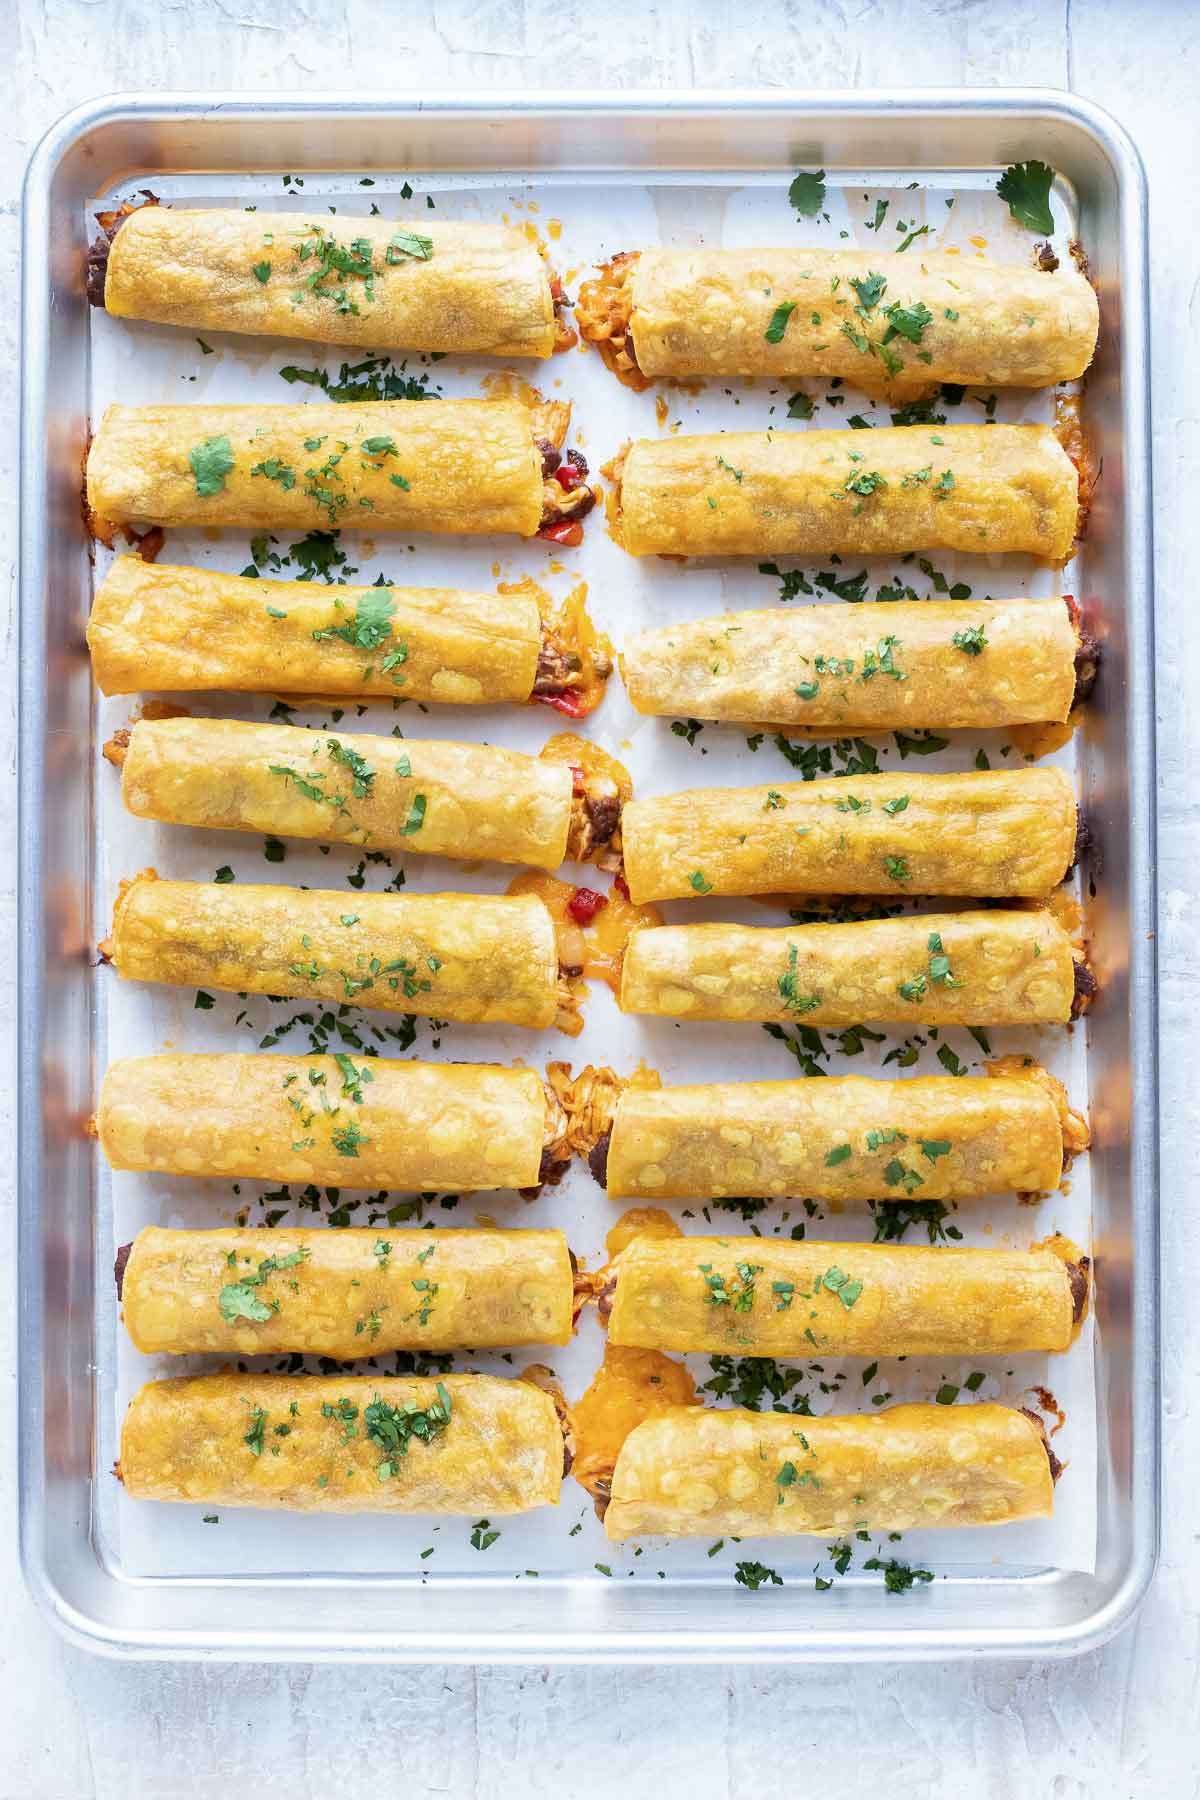 Baked taquitos topped with cilantro.